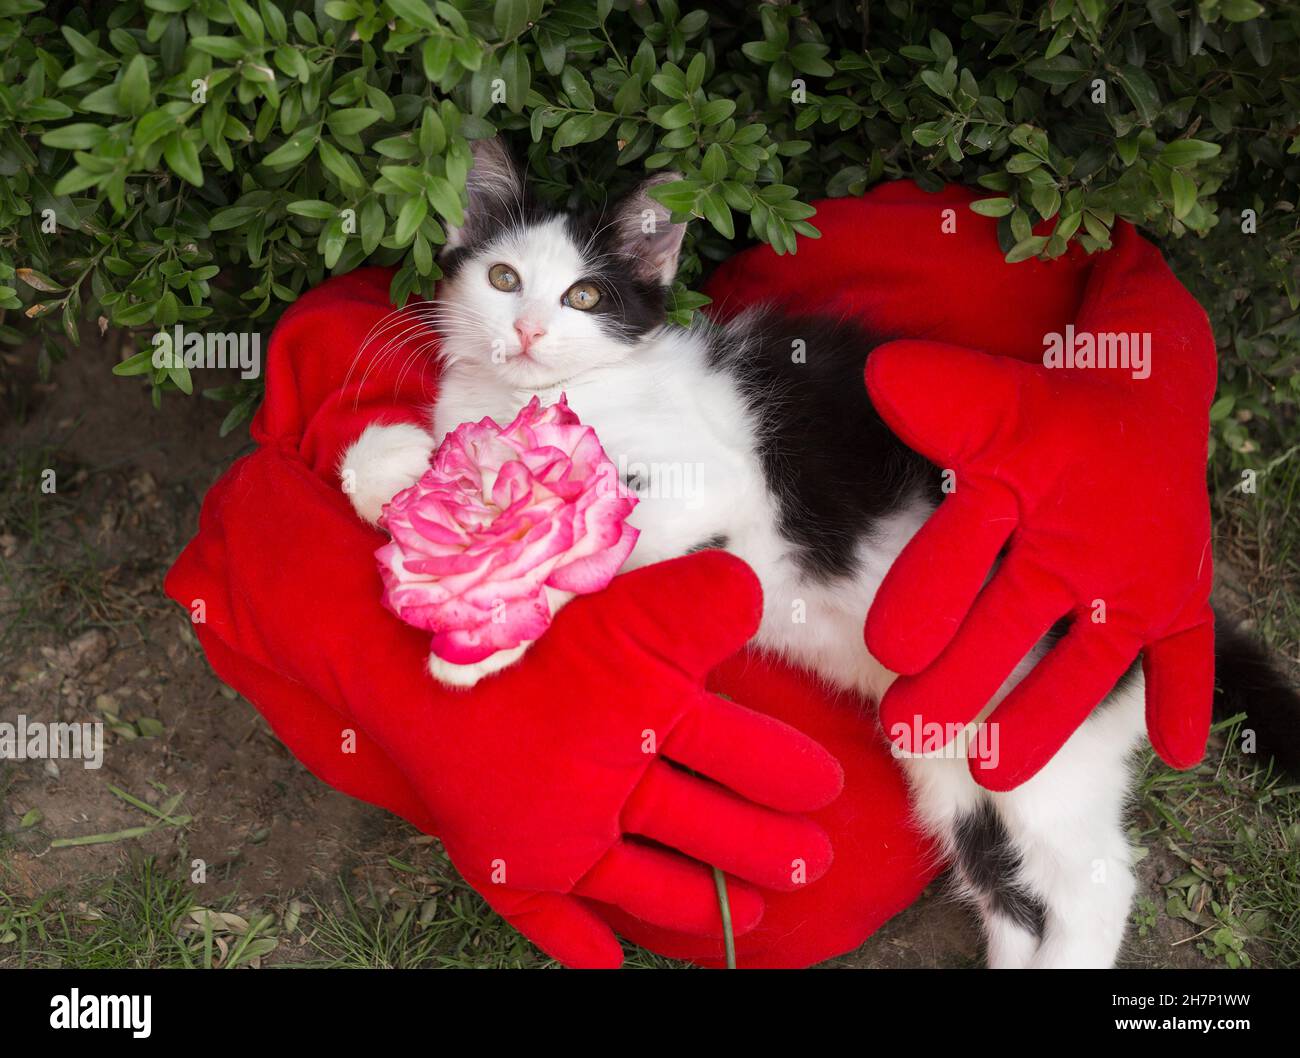 Cute Black And White Kitten Is Resting On A Red Soft Pillow With Hands And A Rose Flower Feline